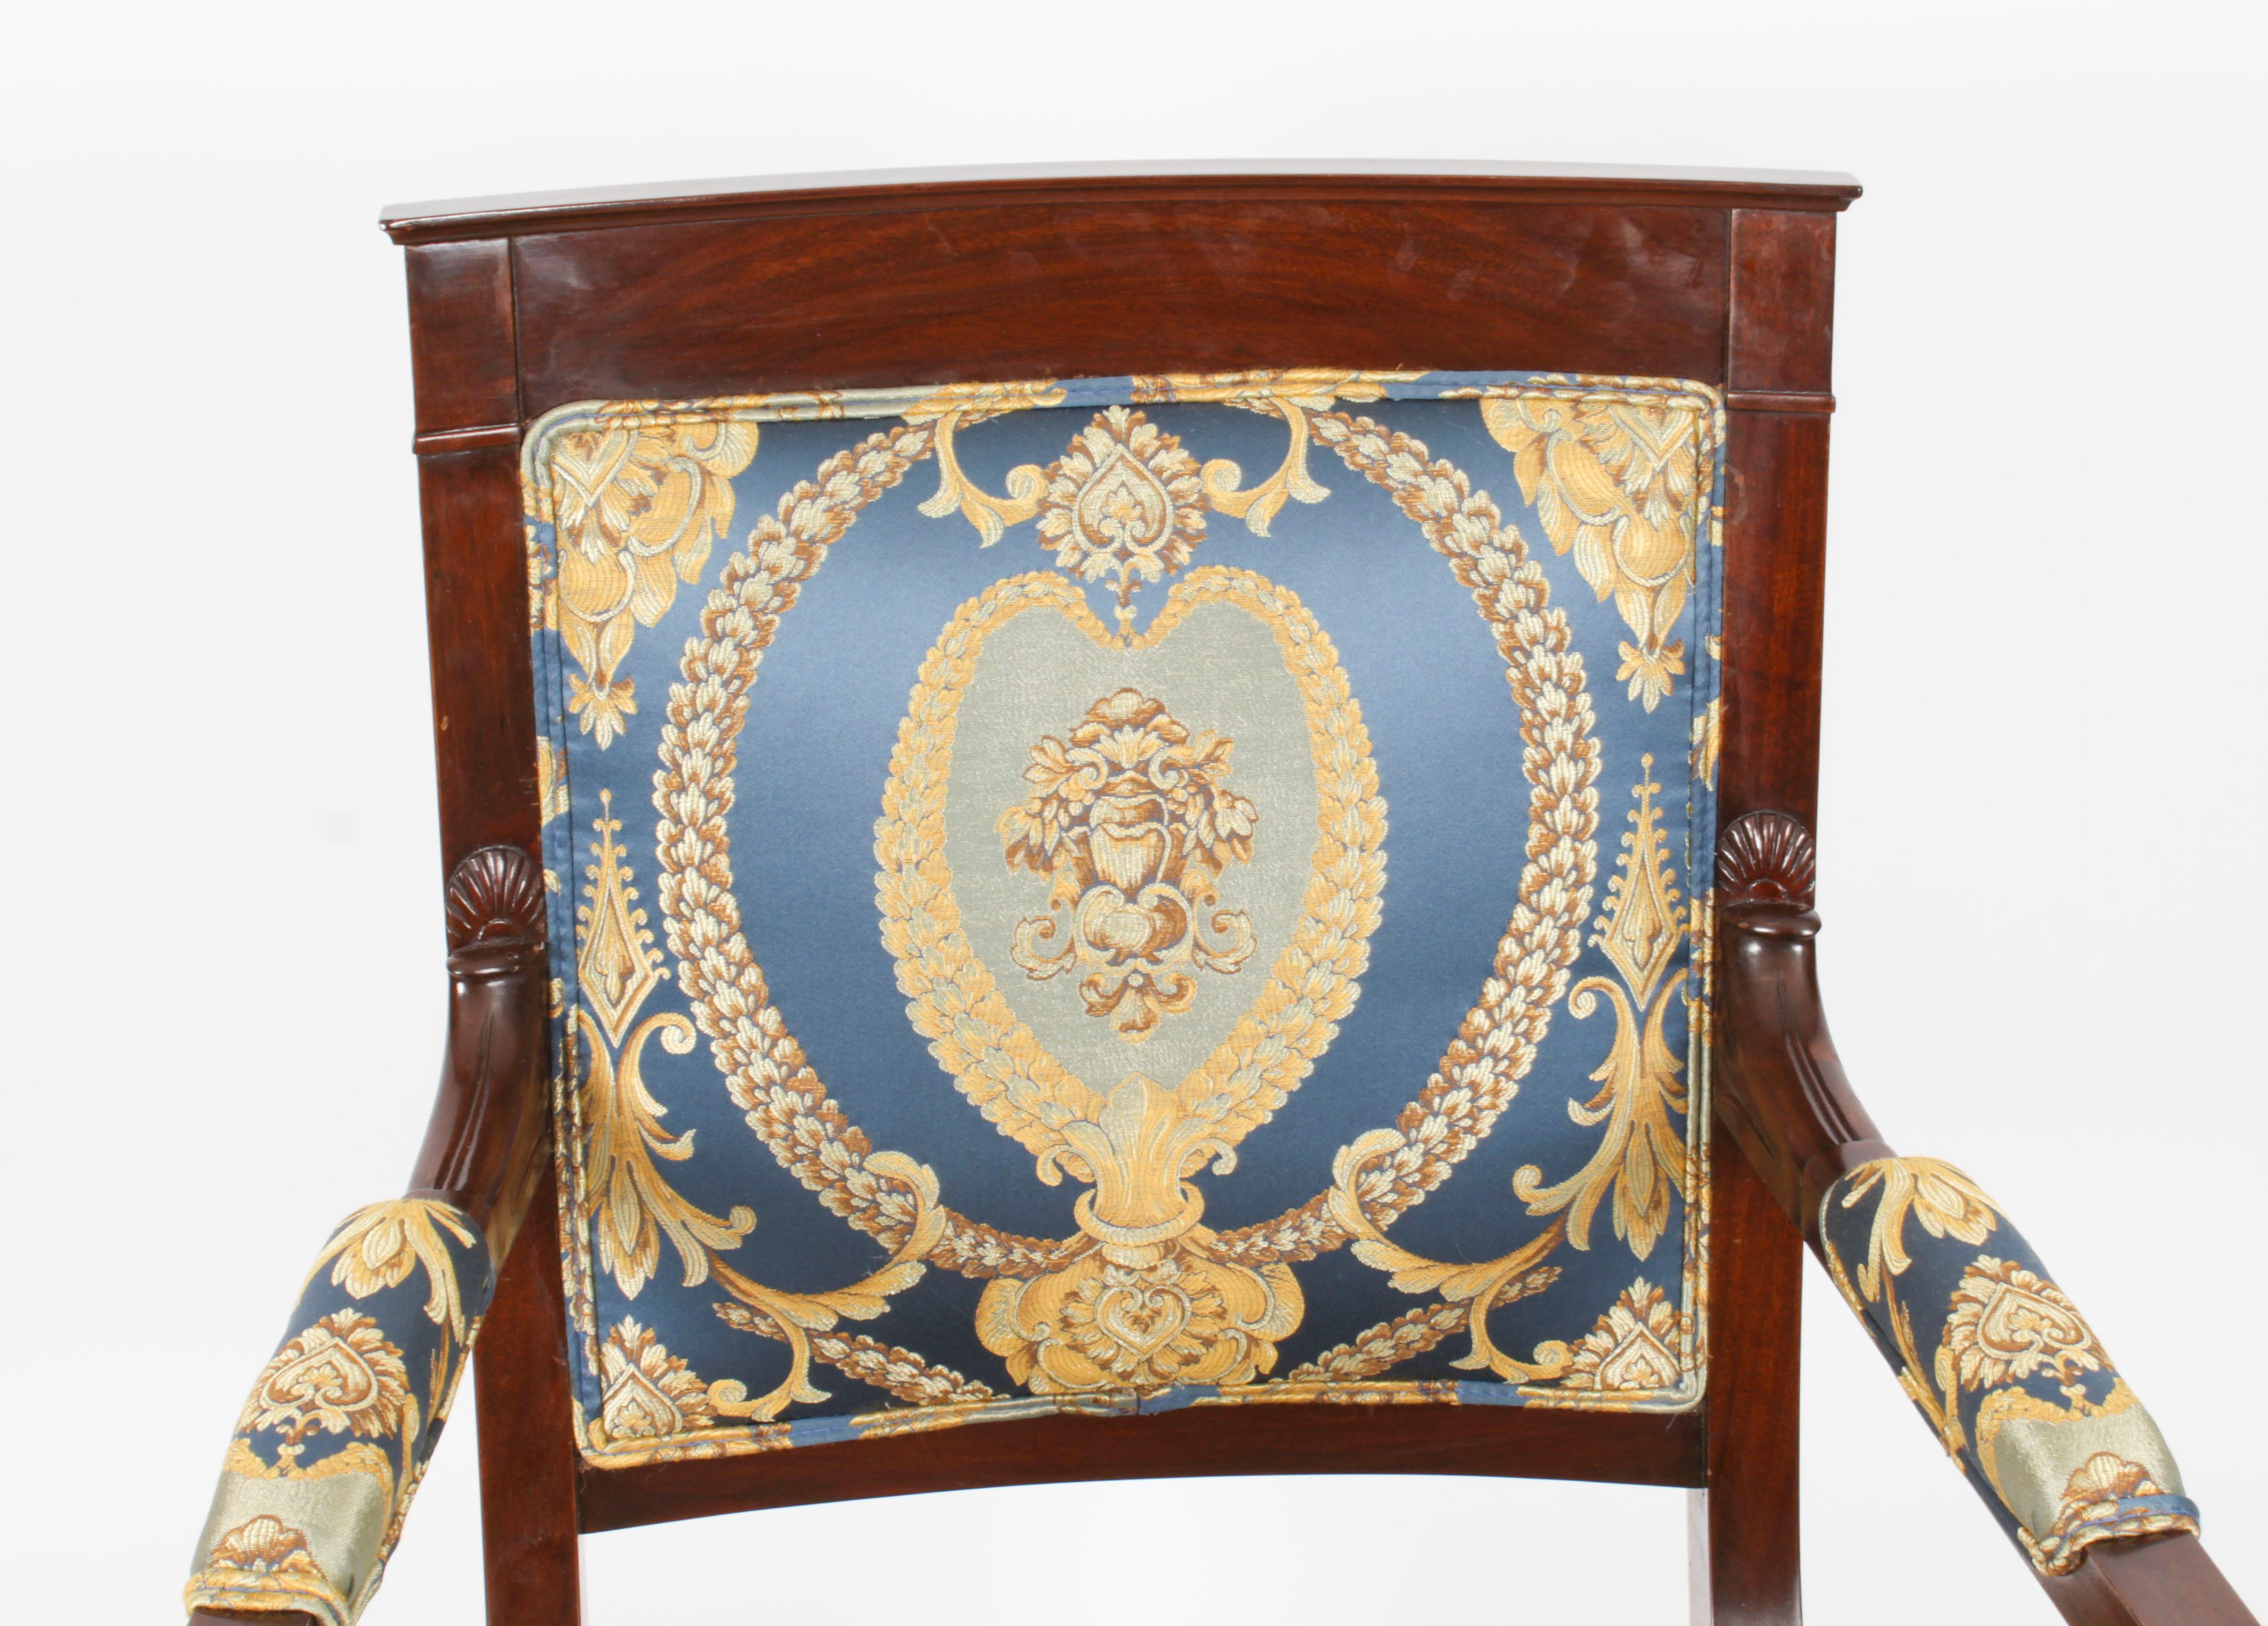 Antique Pair French Empire Revival Ormolu Mounted Armchairs 1870s 19th Century In Good Condition For Sale In London, GB